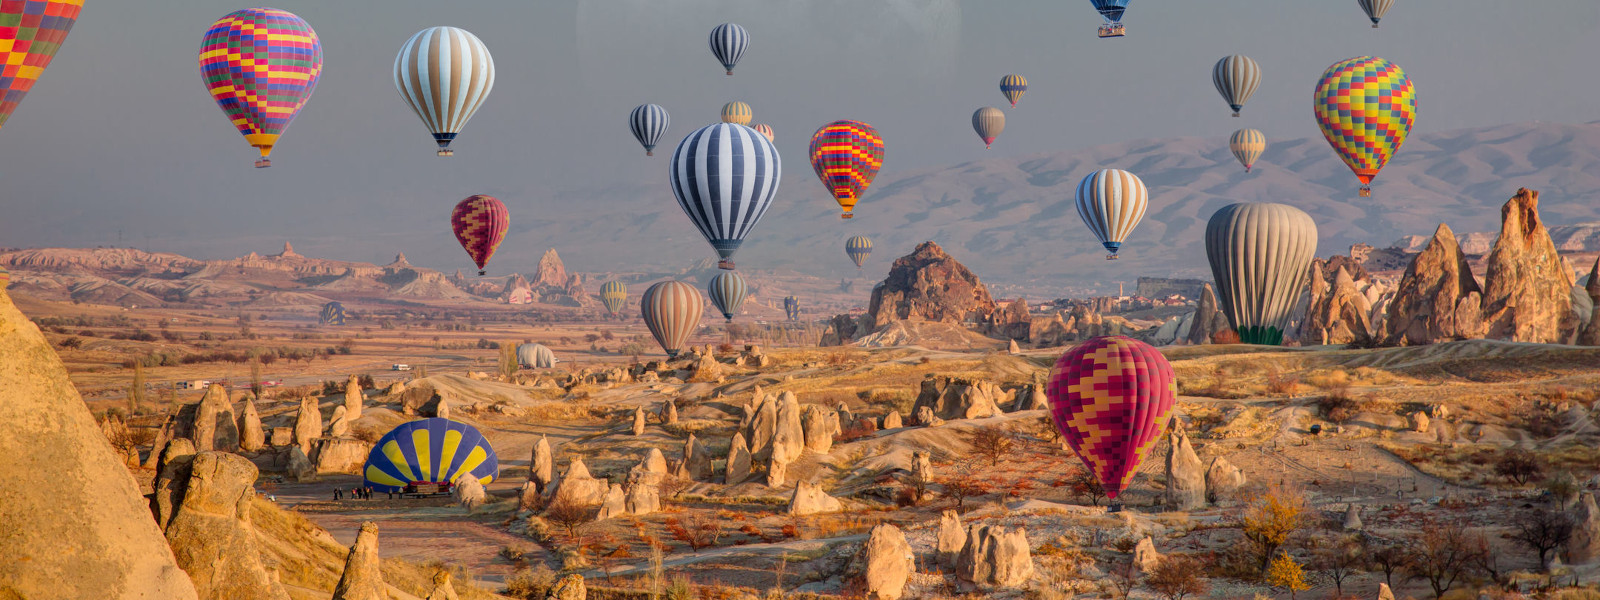 The Best of Turkey Tour Package